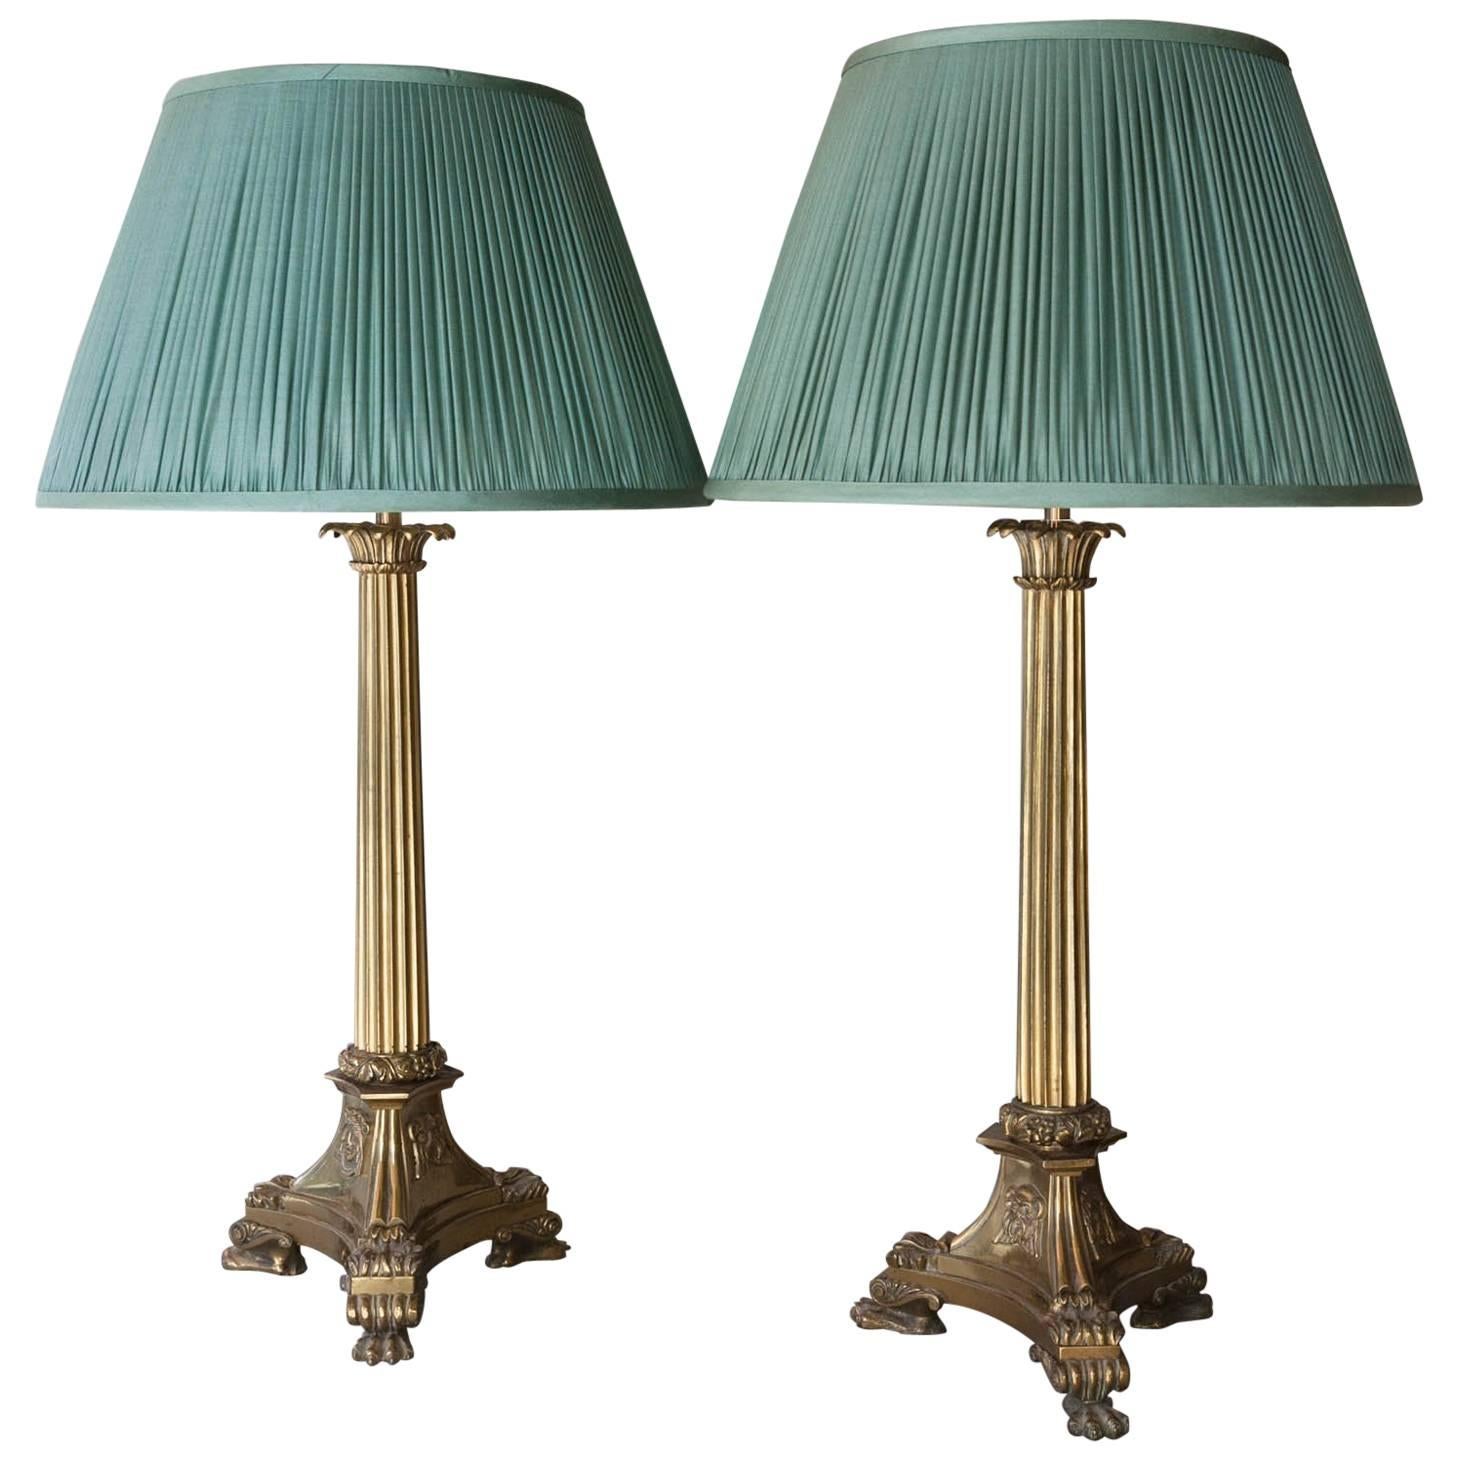 Pair of Late 19th Century Brass Table Lamps